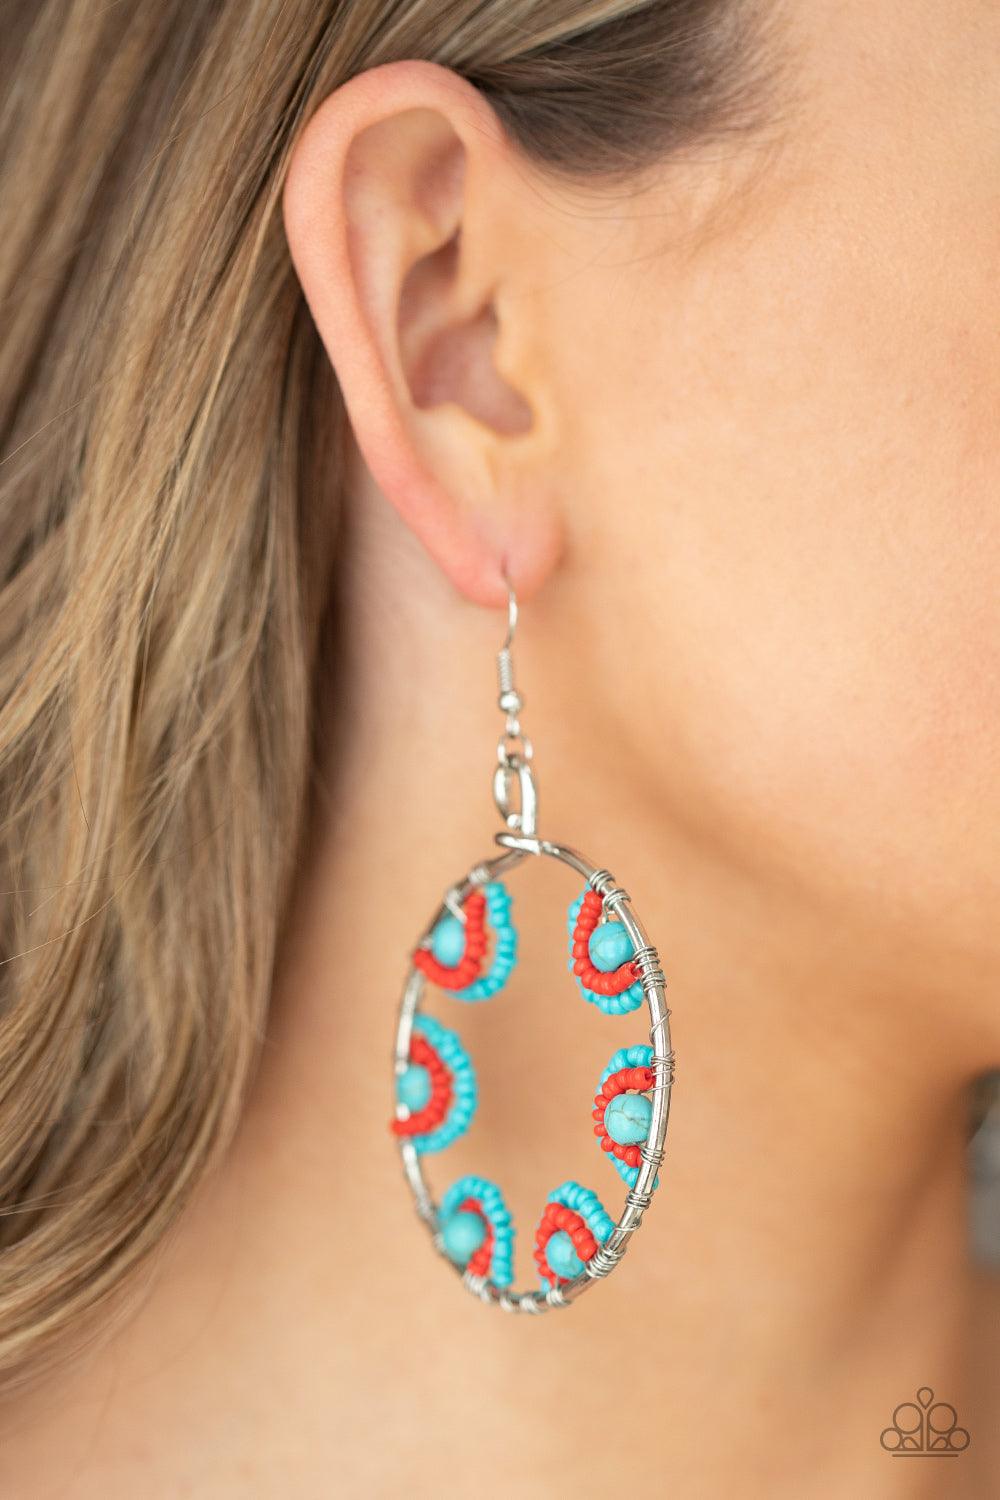 Paparazzi Accessories Off The Rim - Blue Red and turquoise seed beads are threaded on wires and looped over turquoise stones on the inside of a spacious silver hoop. The pattern makes its way around the inside of the circle for an around-the-world air. Ea